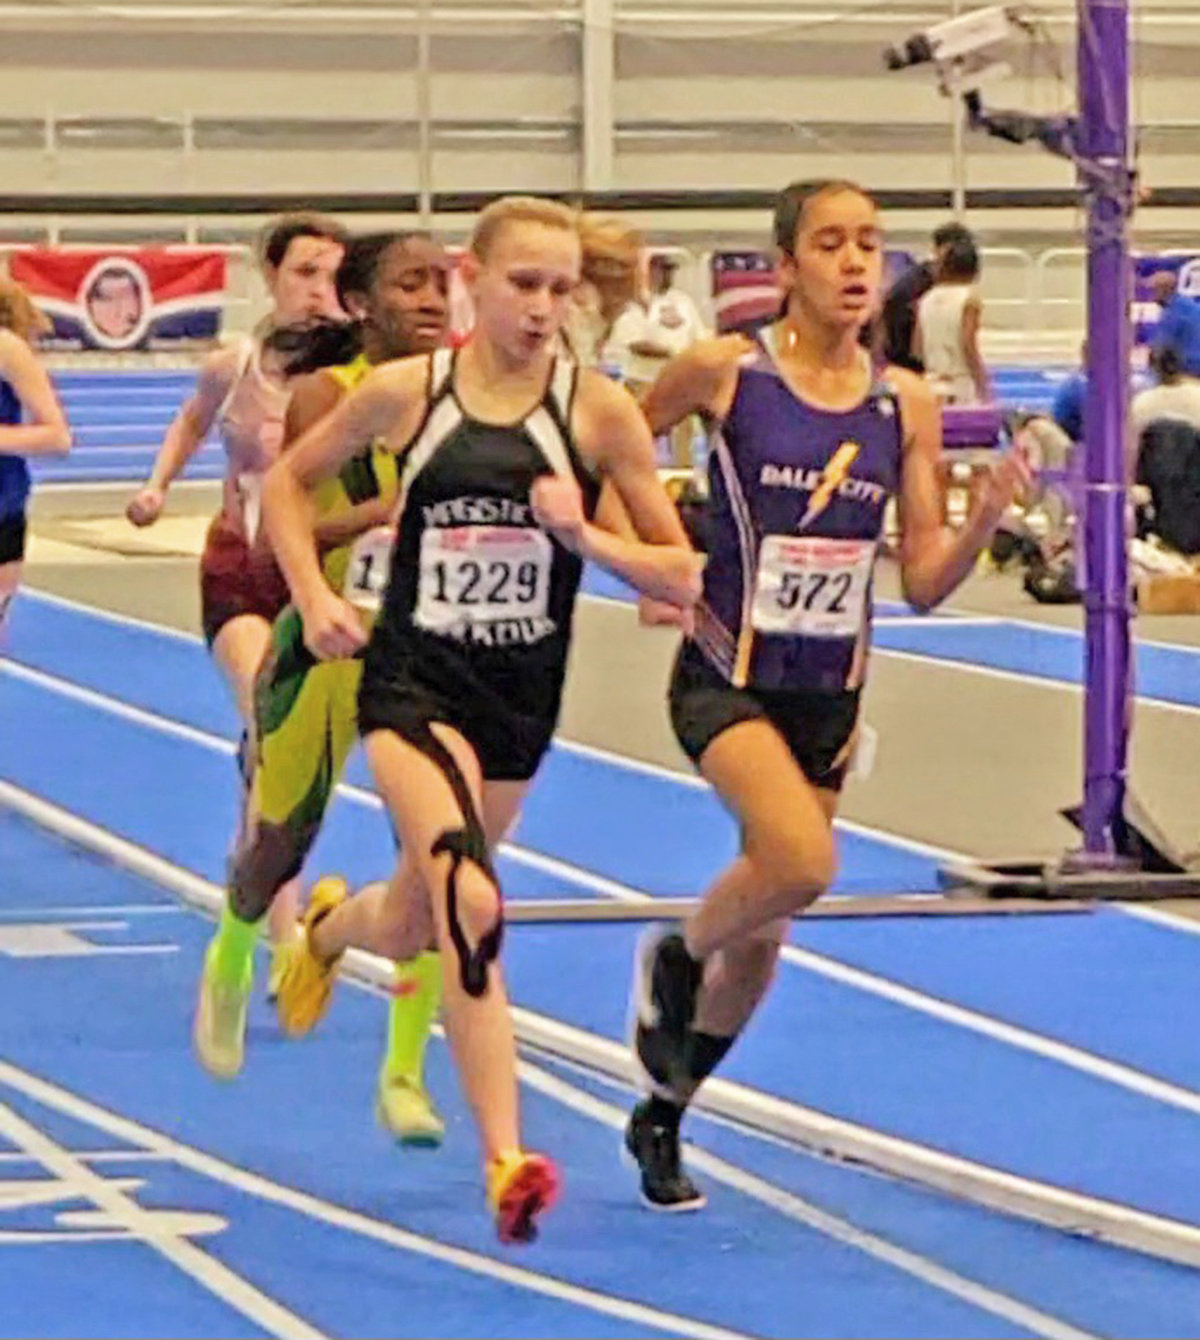 Emma Szarek of Westmoreland was second in the 800-meter race and third in the 1,500 for 14-year-olds at the 2023 AAU Indoor Track and Field Nationals in Virginia Beach. She set a personal record in the 800.